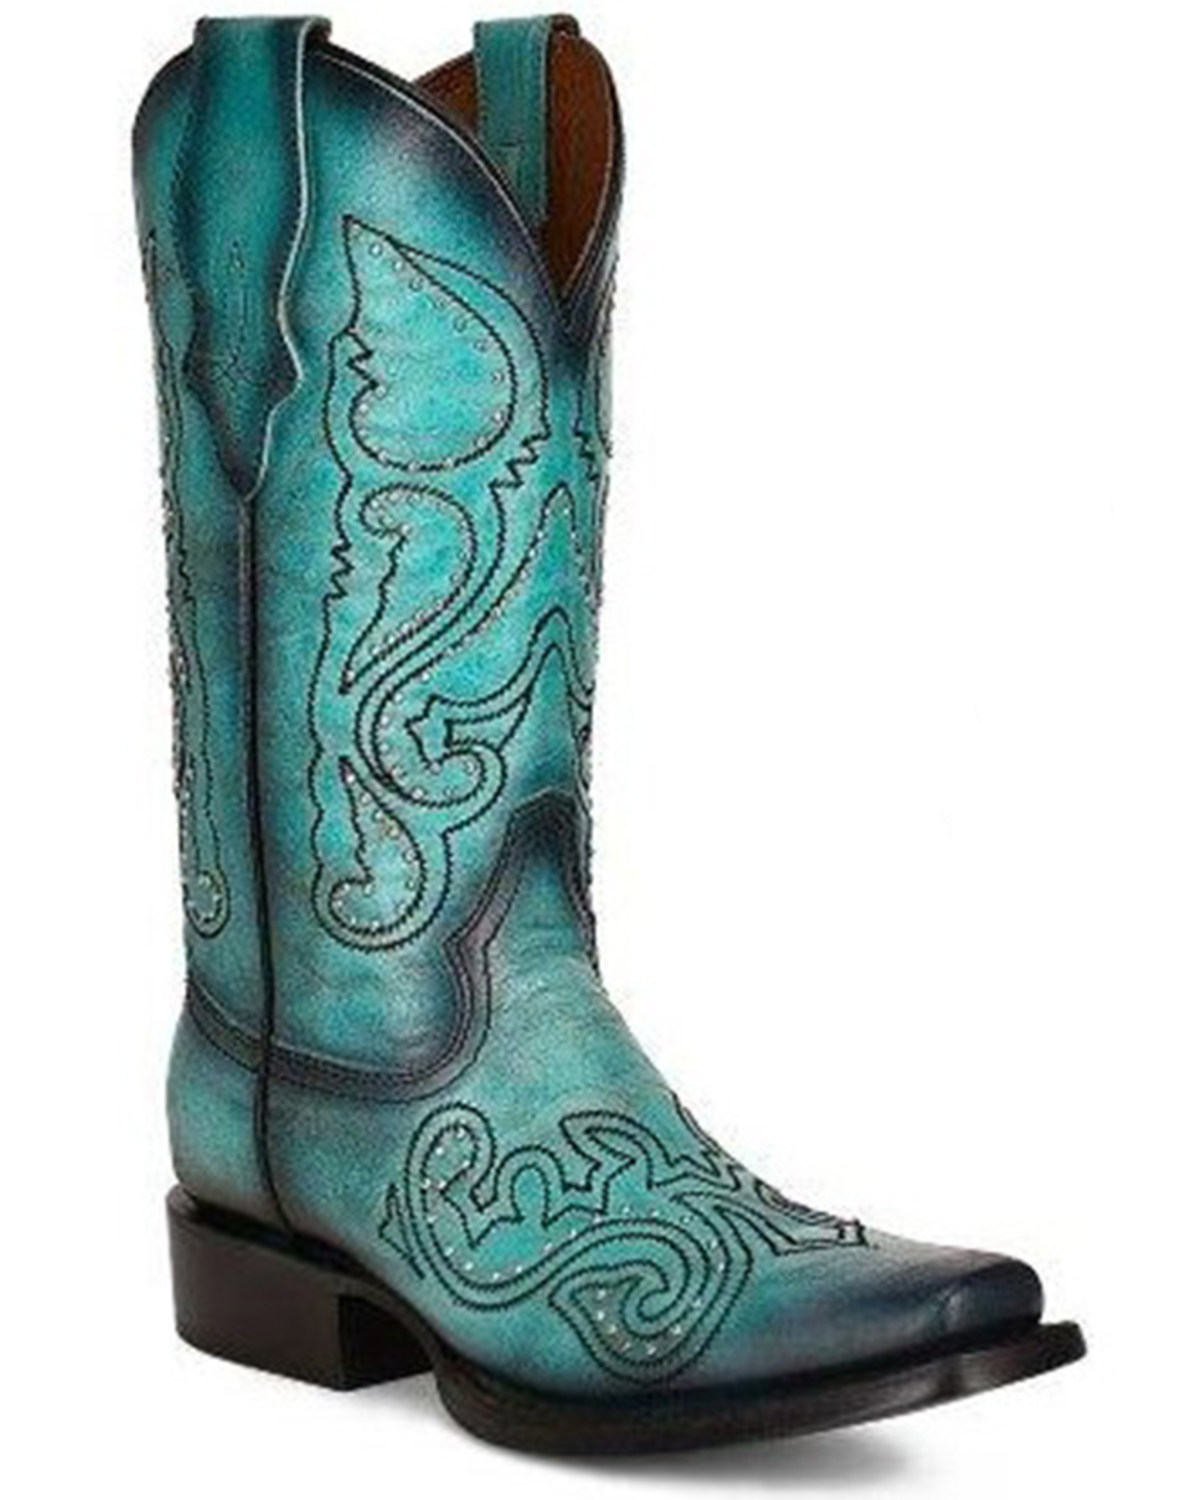 Corral Women's Studded Western Boots - Square Toe